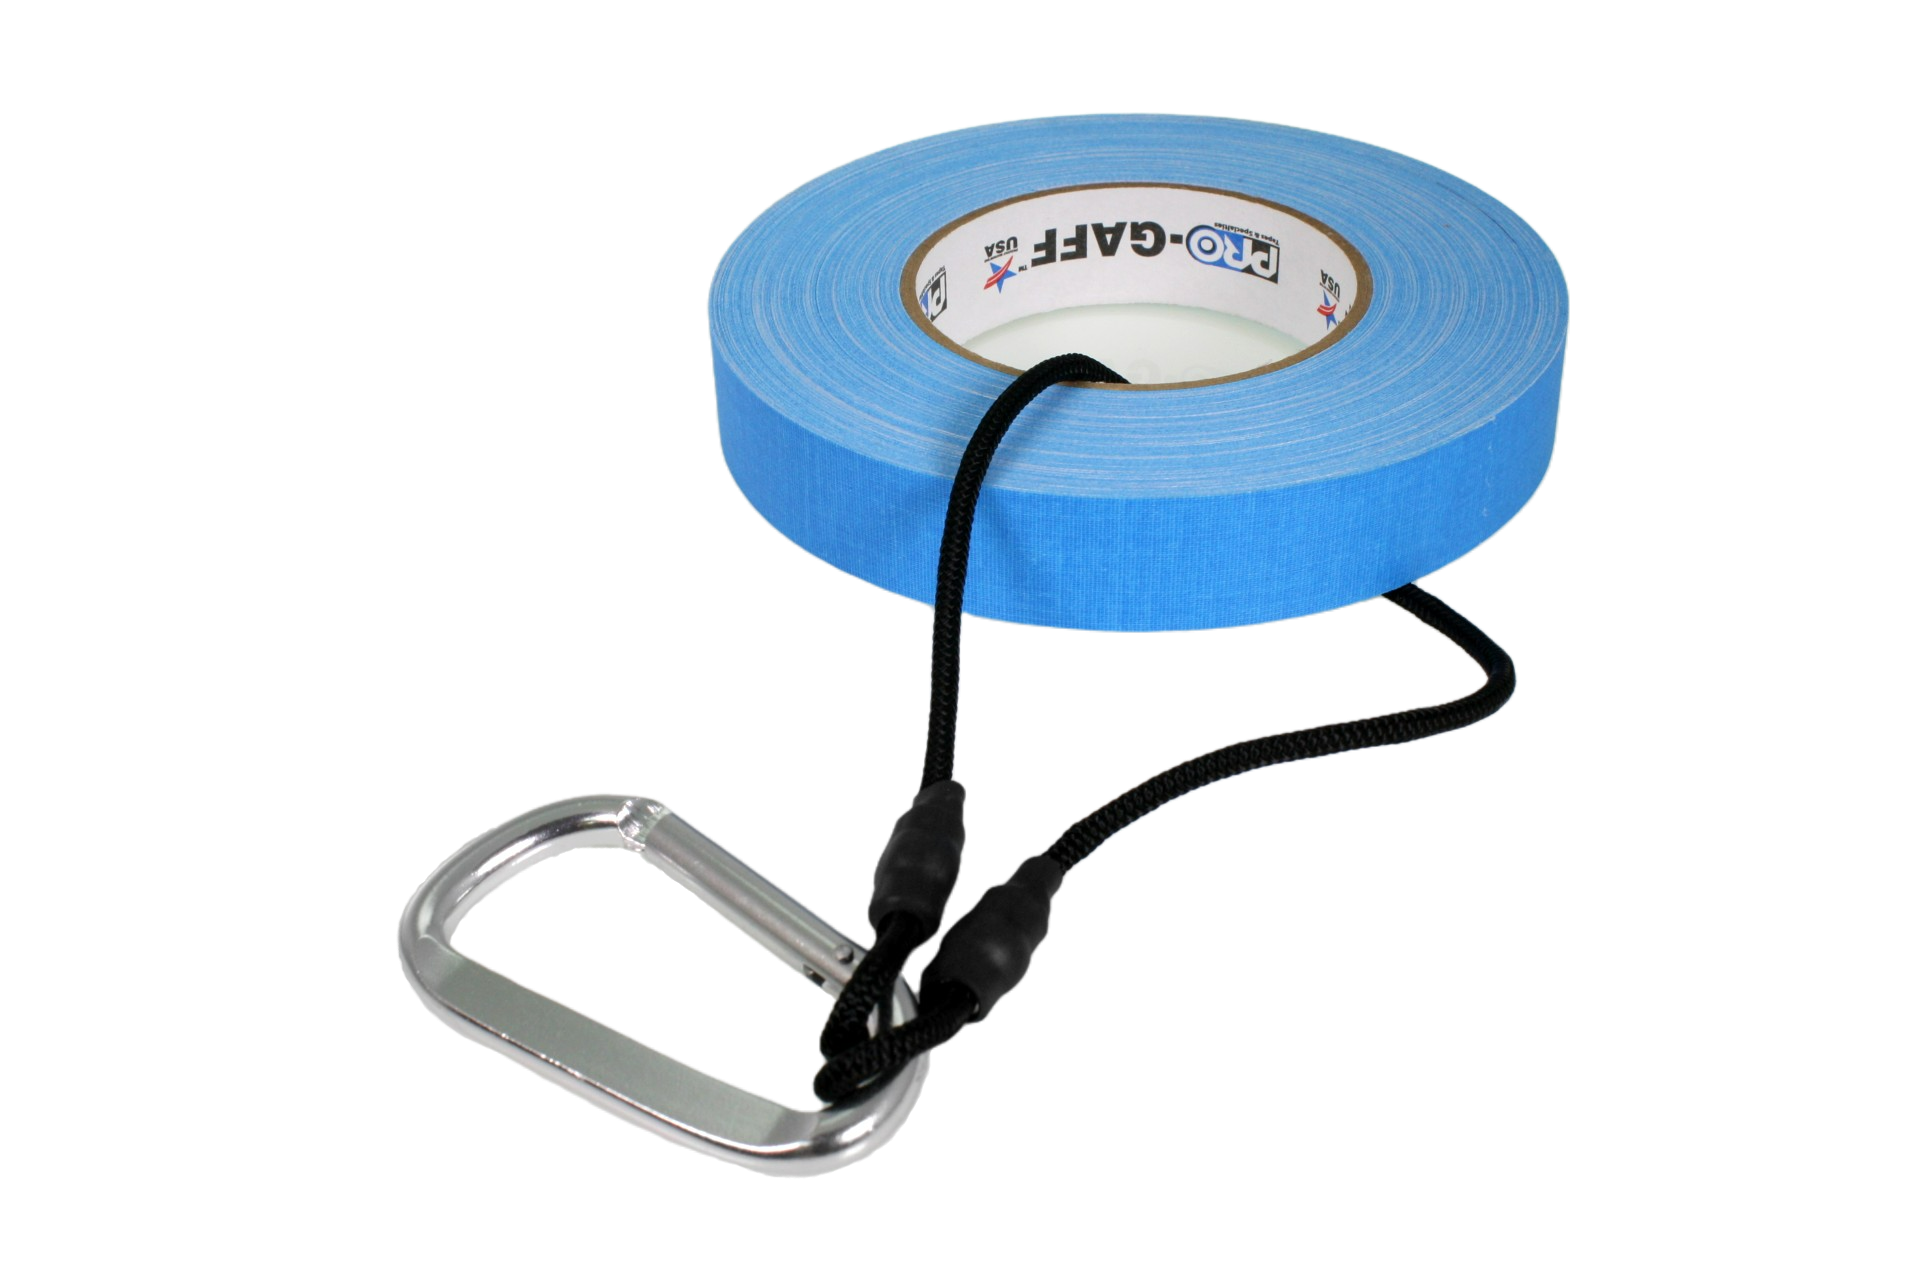 Small lanyard, on a 1" roll of Pro Gaff tape